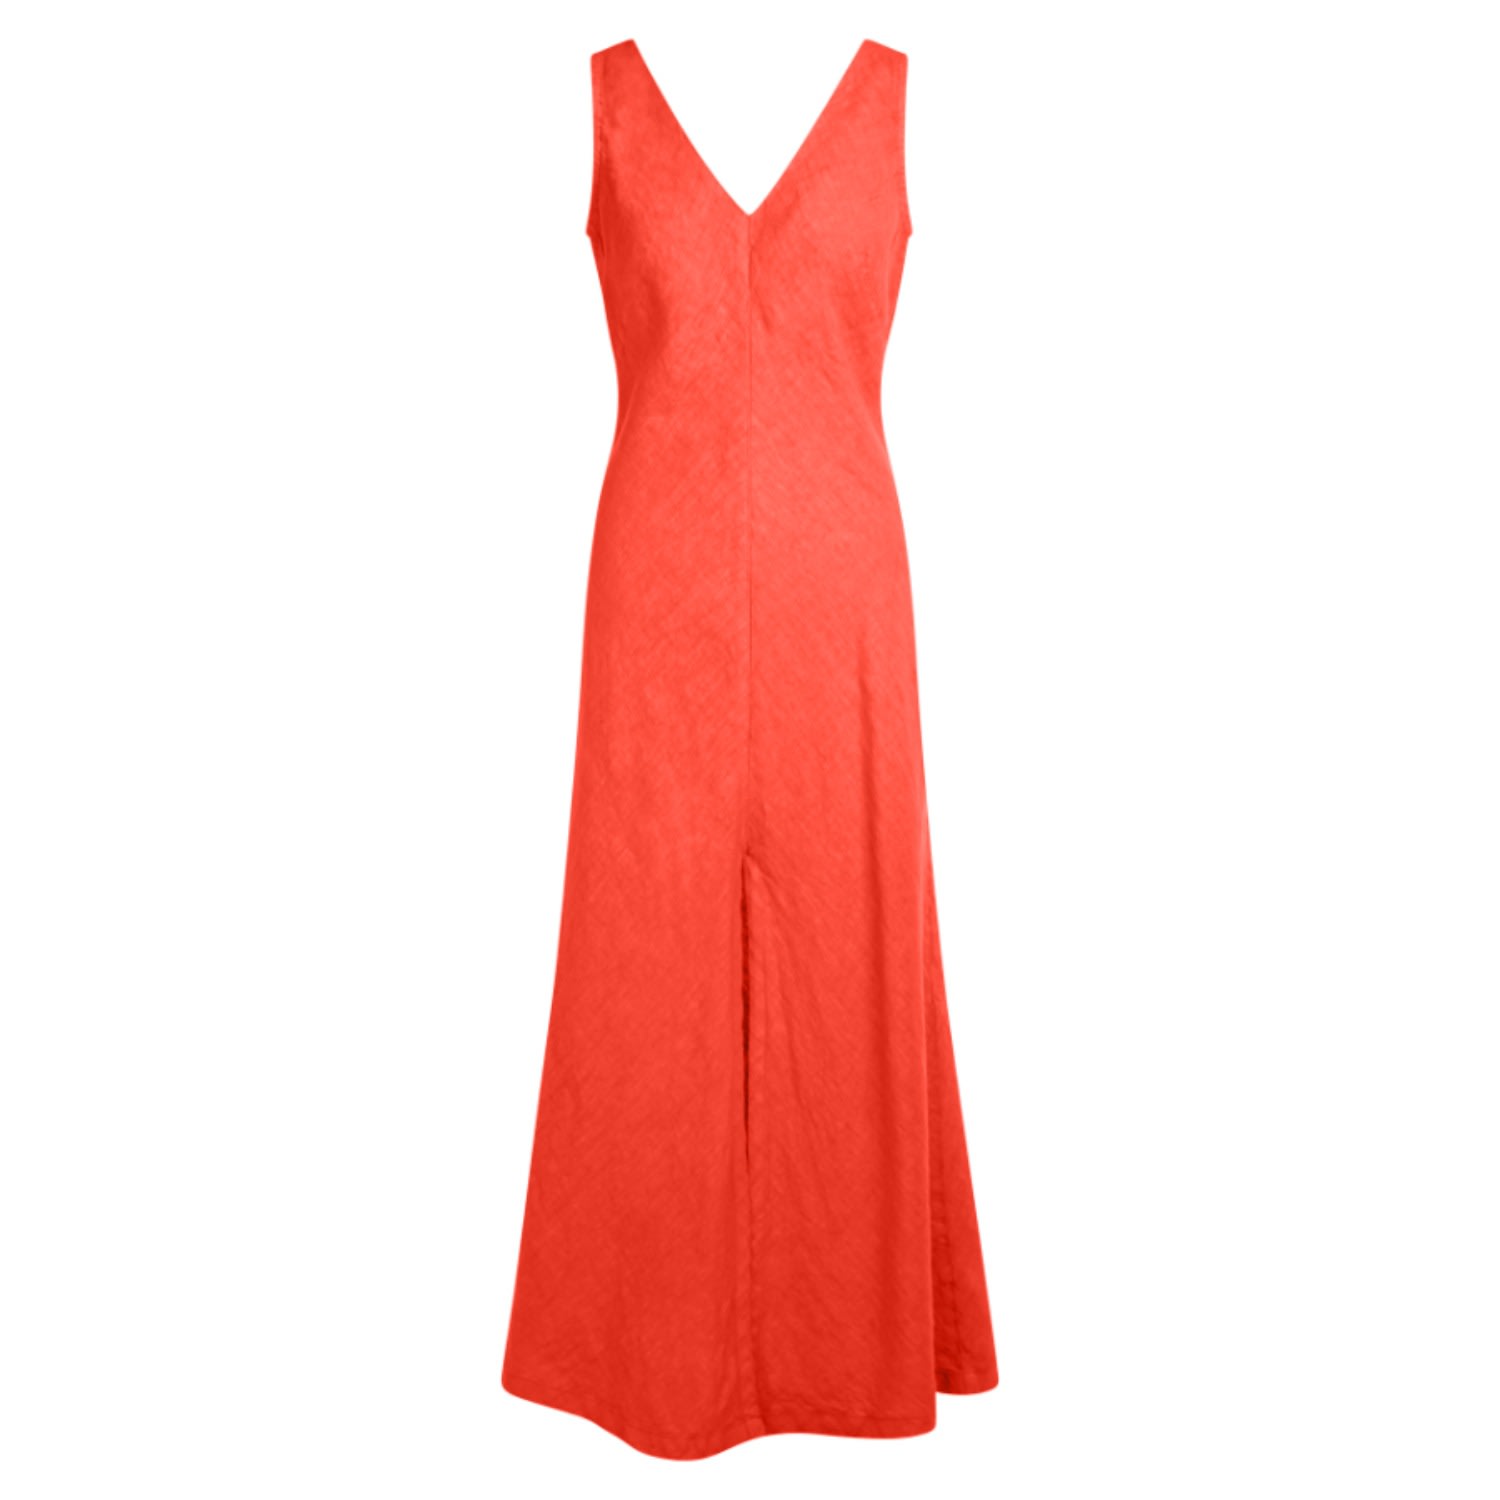 Women’s Red "V" Neck Maxi Linen Dress - Coral Reef Small Haris Cotton